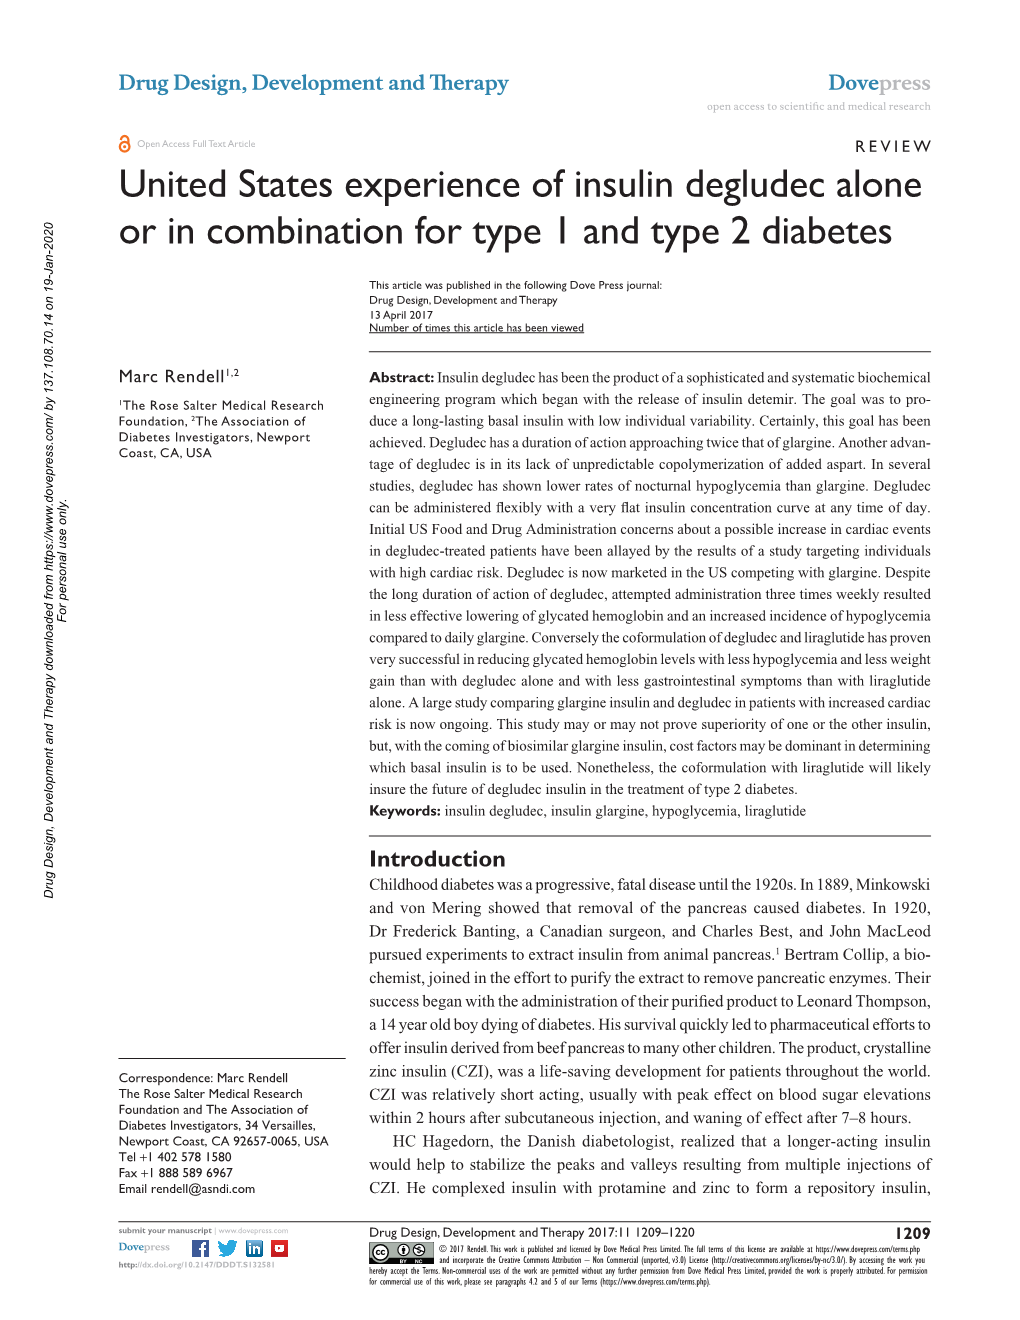 United States Experience of Insulin Degludec Alone Or in Combination for Type 1 and Type 2 Diabetes